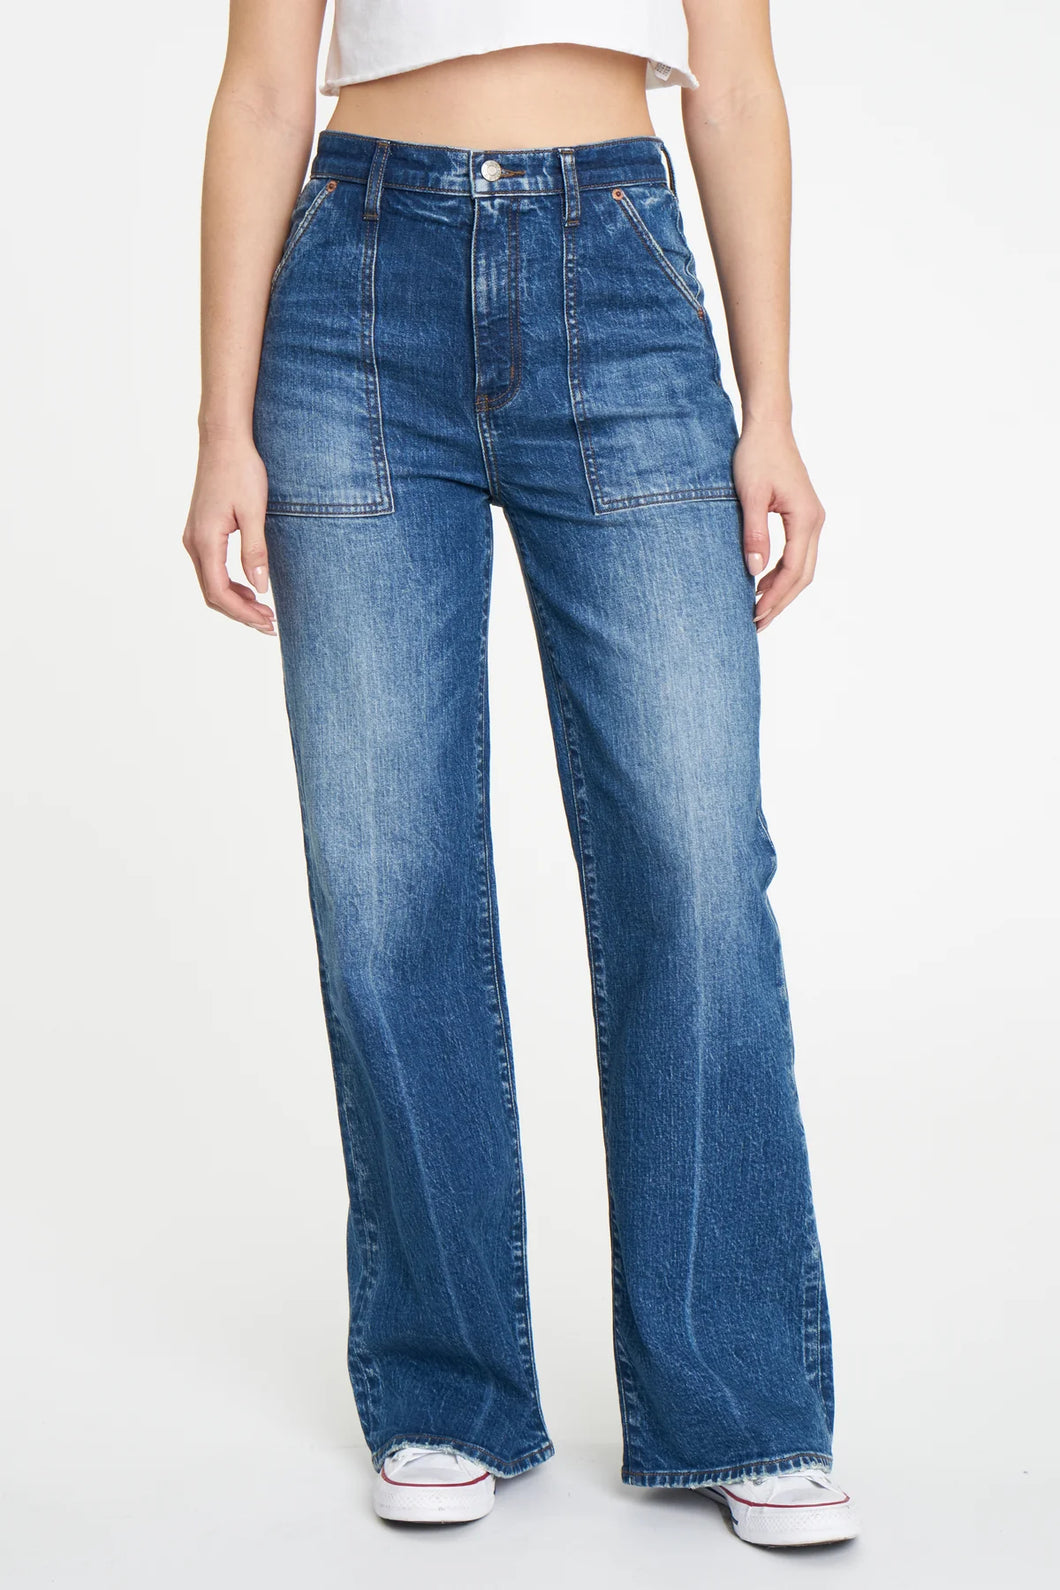 Far Out Play Date Jeans